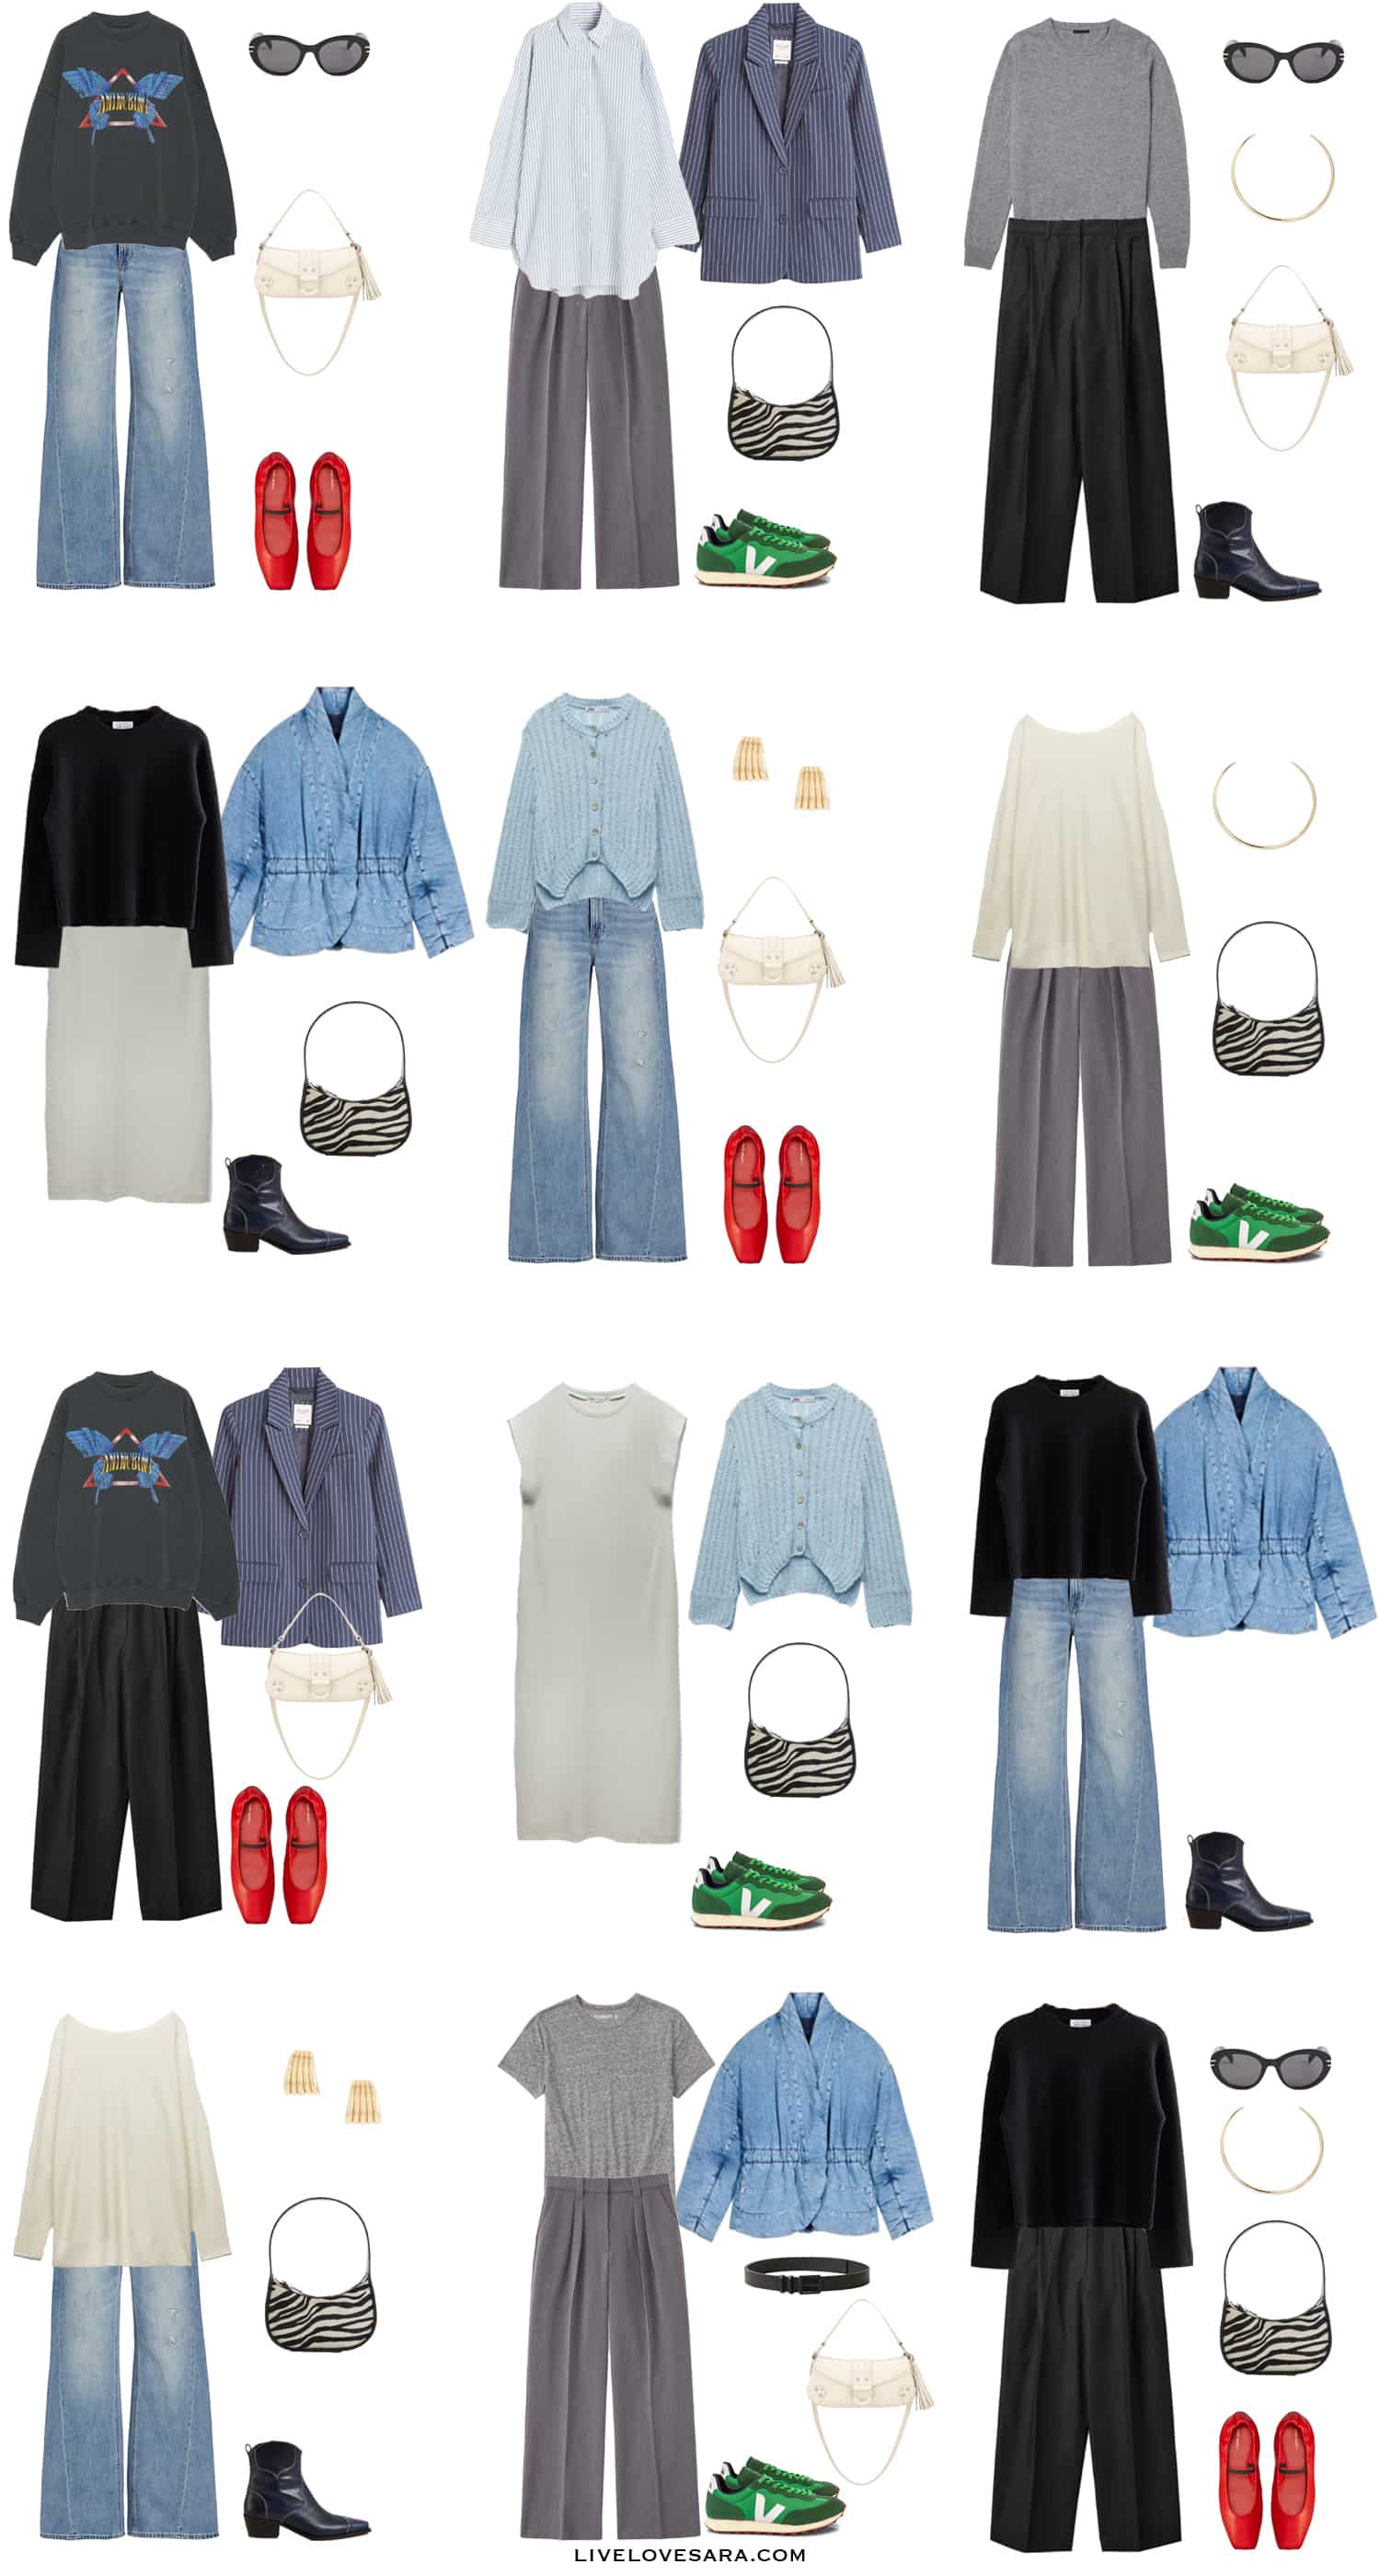 A White with 12 outfits from the ultimate spring packing list.